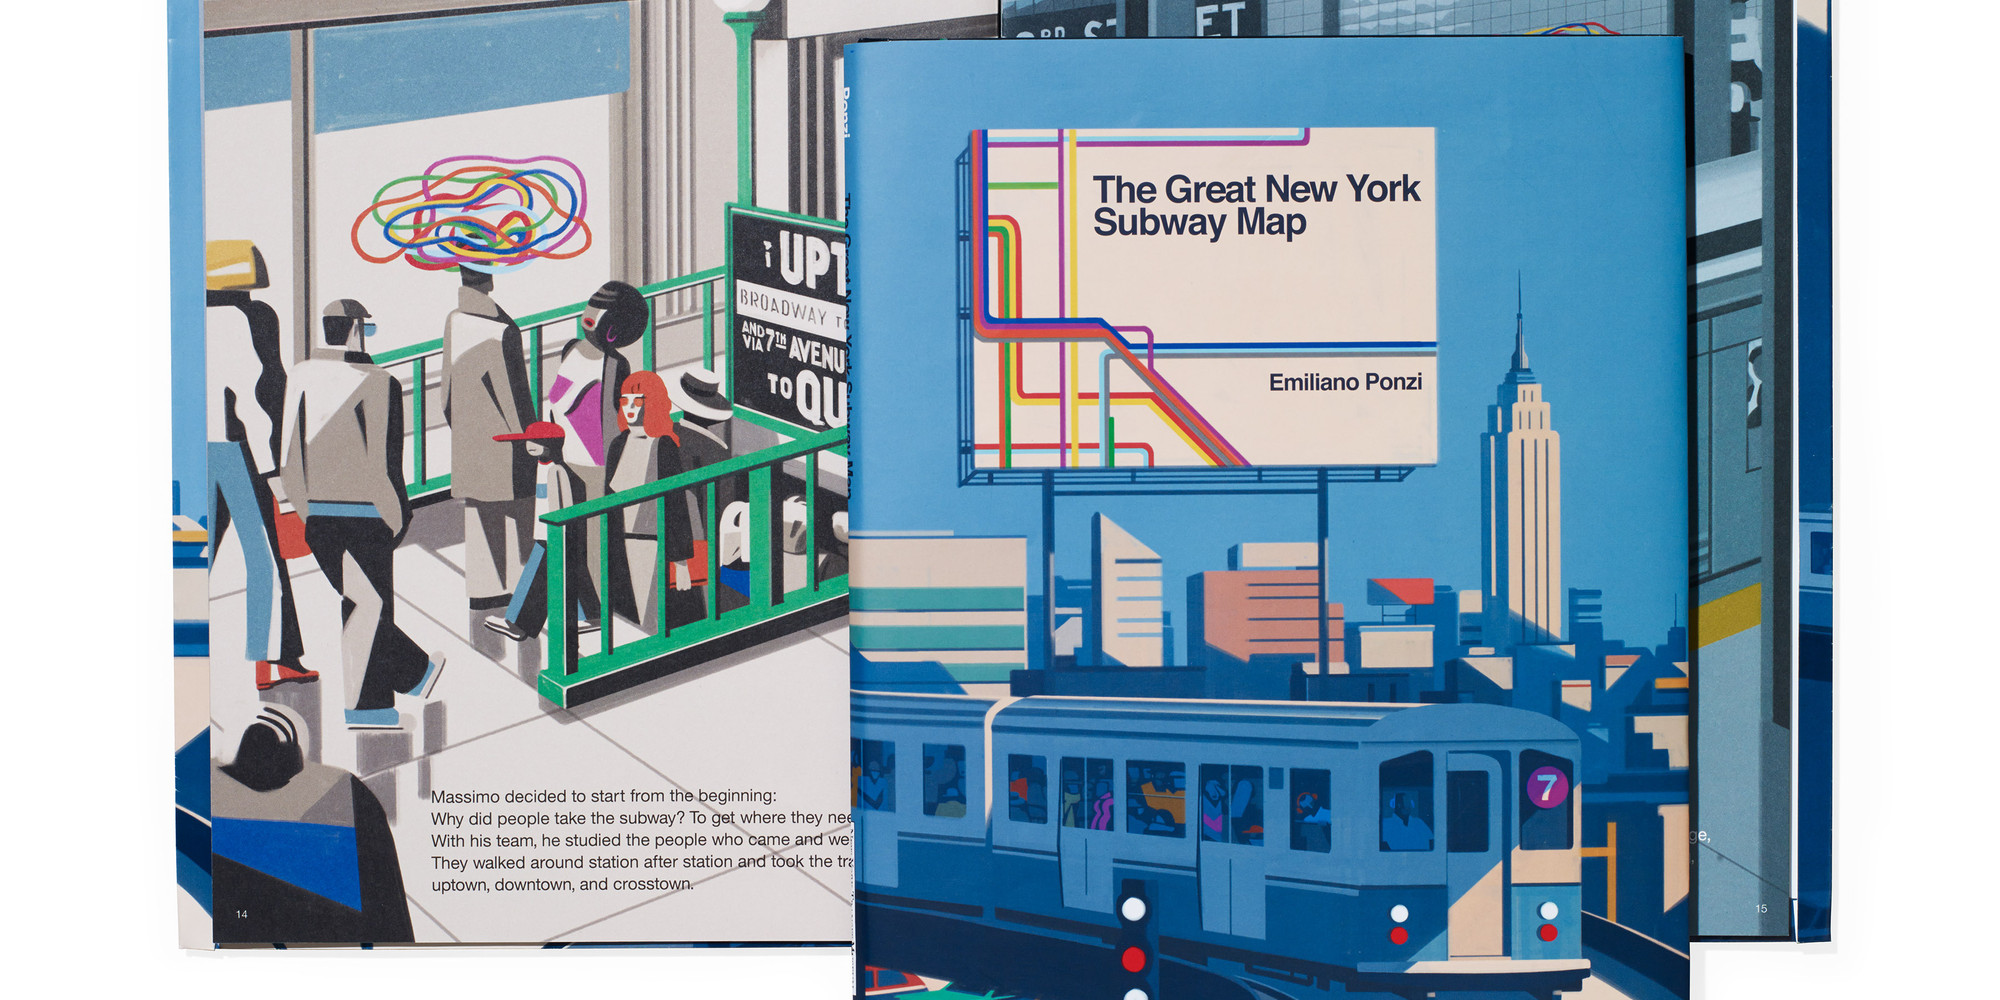 Detail from Emiliano Ponzi’s The Greater New York Subway Map Book